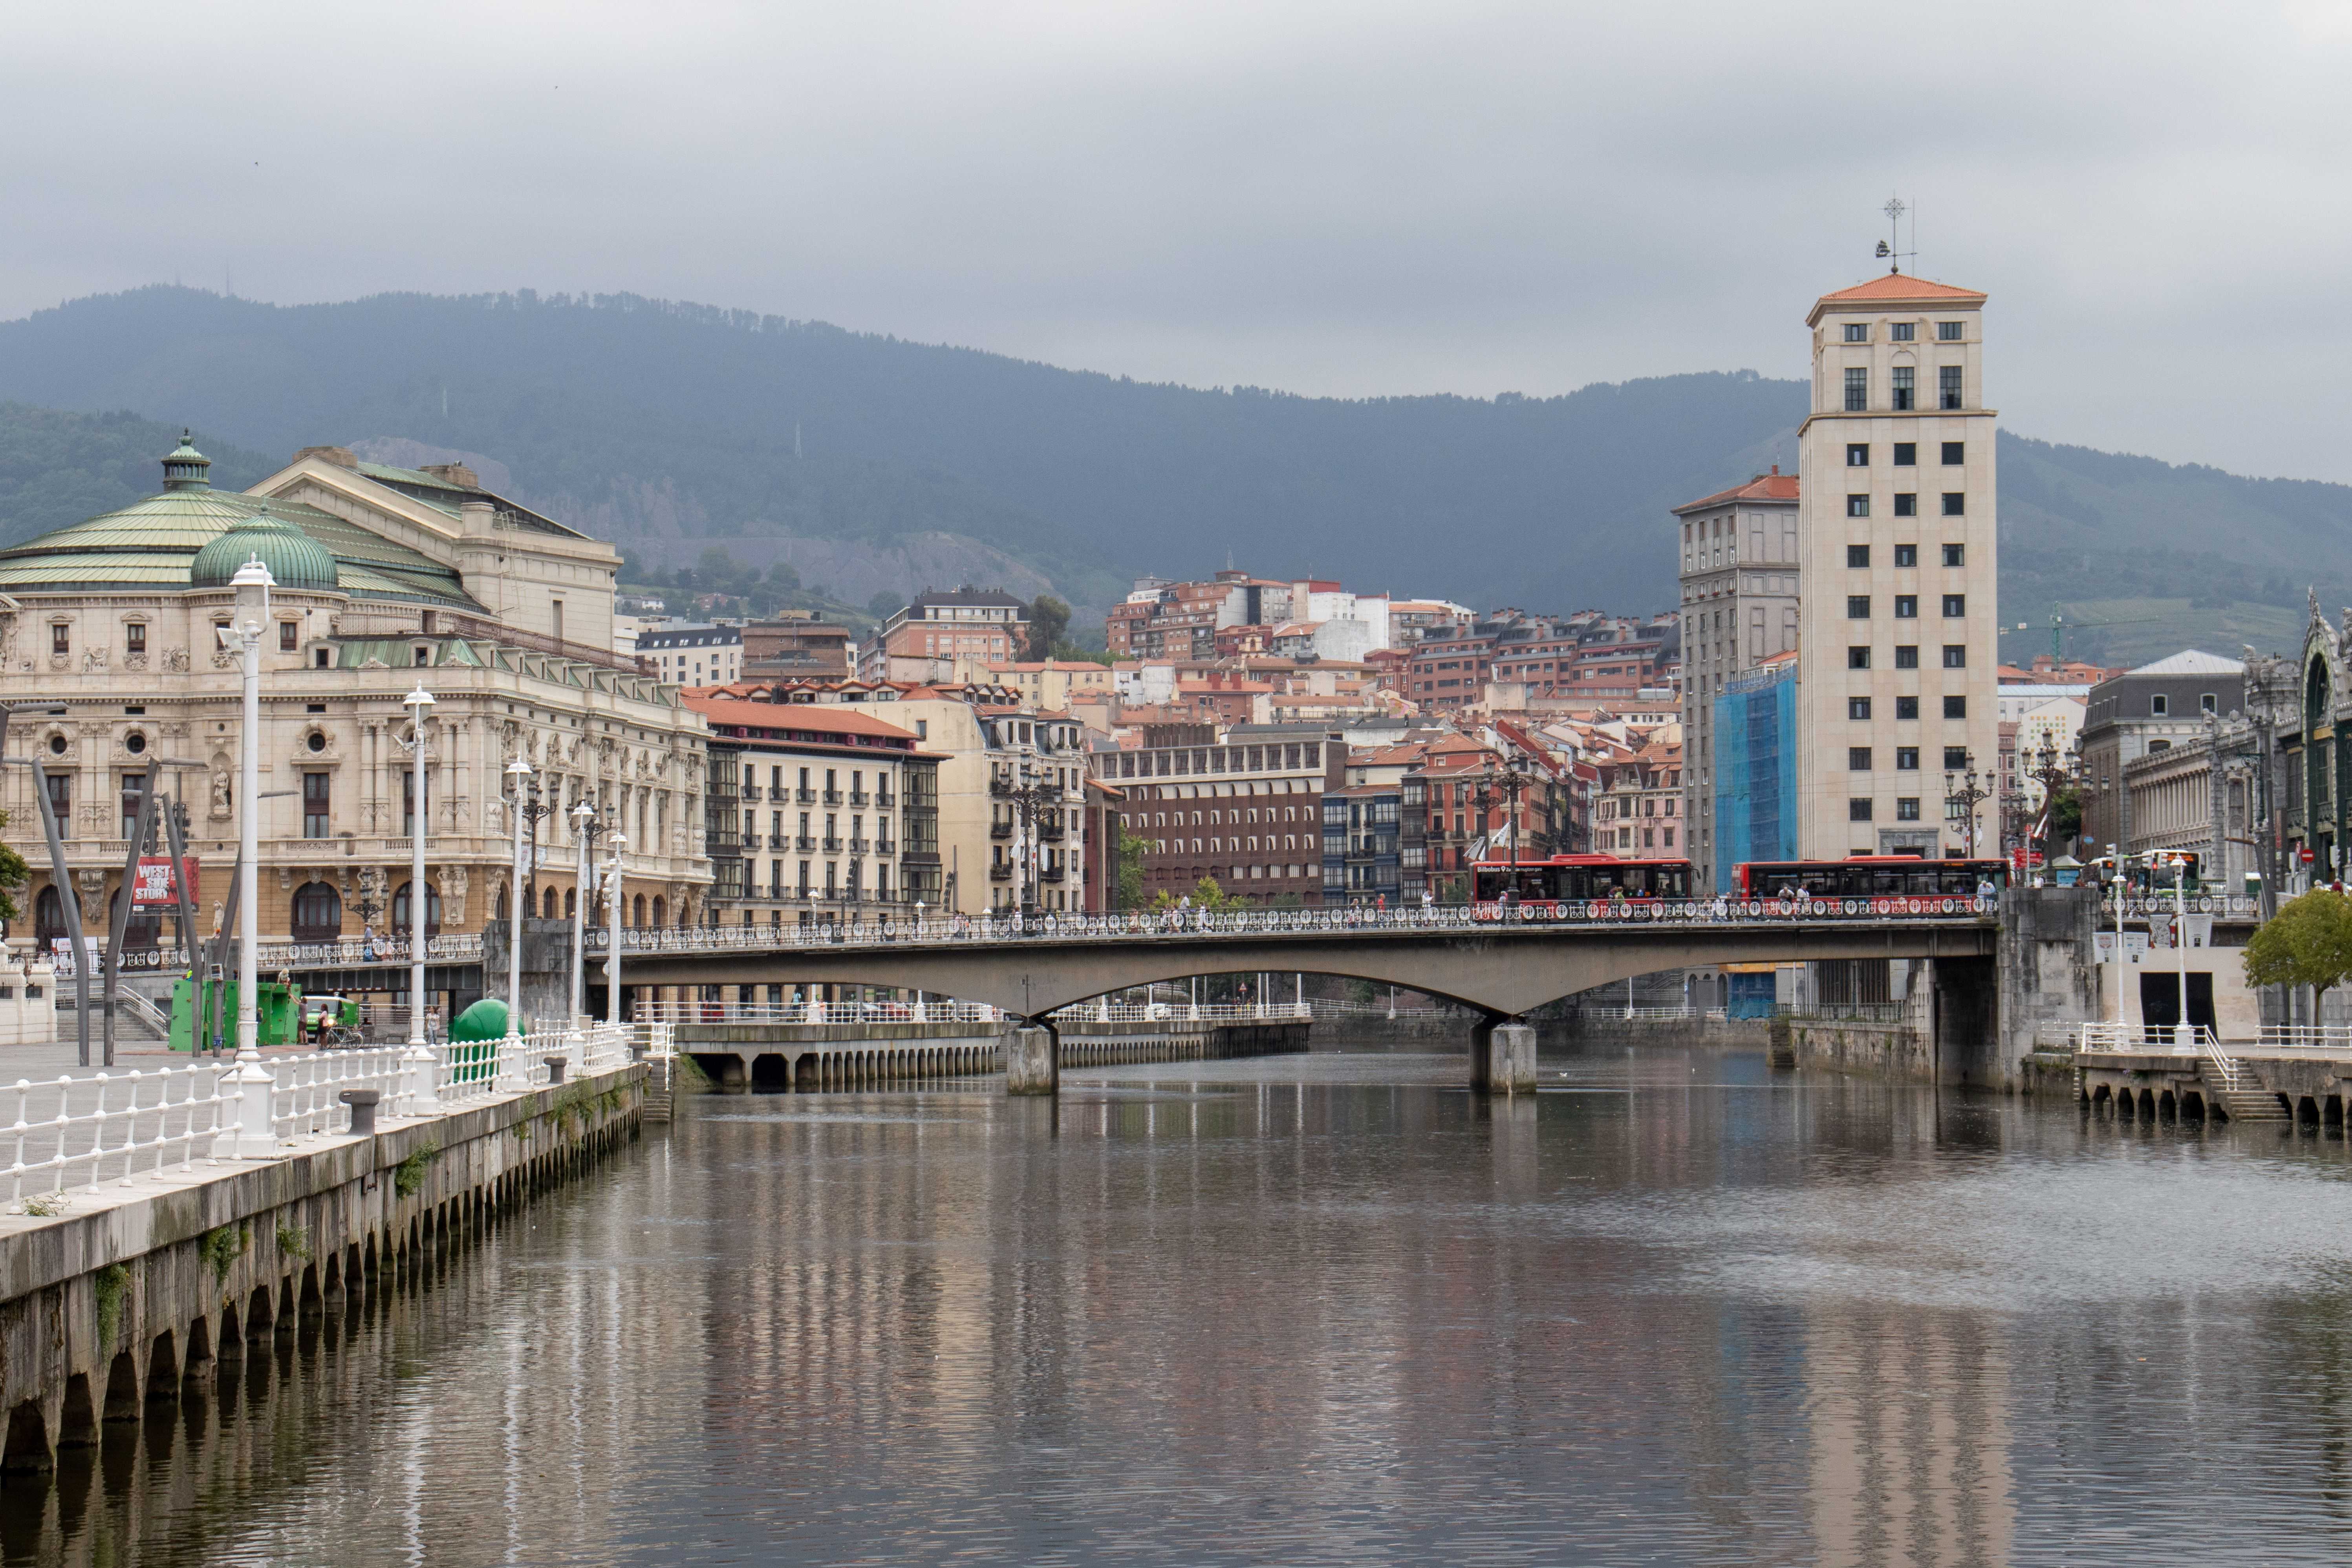 A pic of something to do in Bilbao